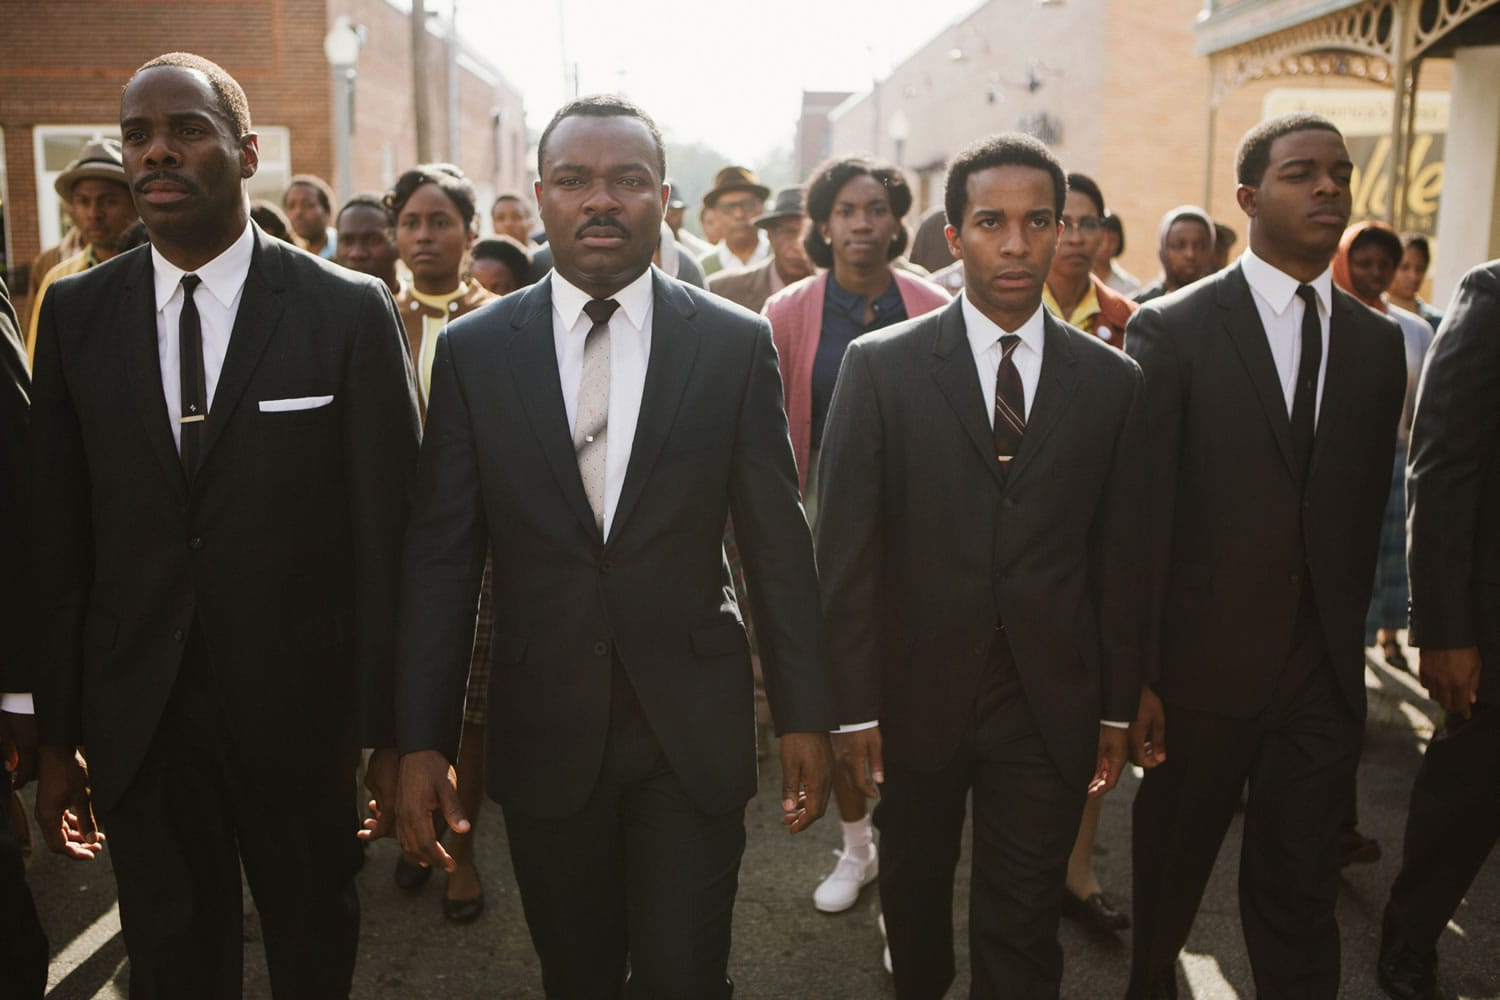 Atsushi Nishijim/Paramount Pictures
Colman Domingo, from left, stars as Ralph Abernathy; David Oyelowo as Dr. Martin Luther King Jr.; Andr? Holland as Andrew Young; and Stephan James as John Lewis in &quot;Selma.&quot;